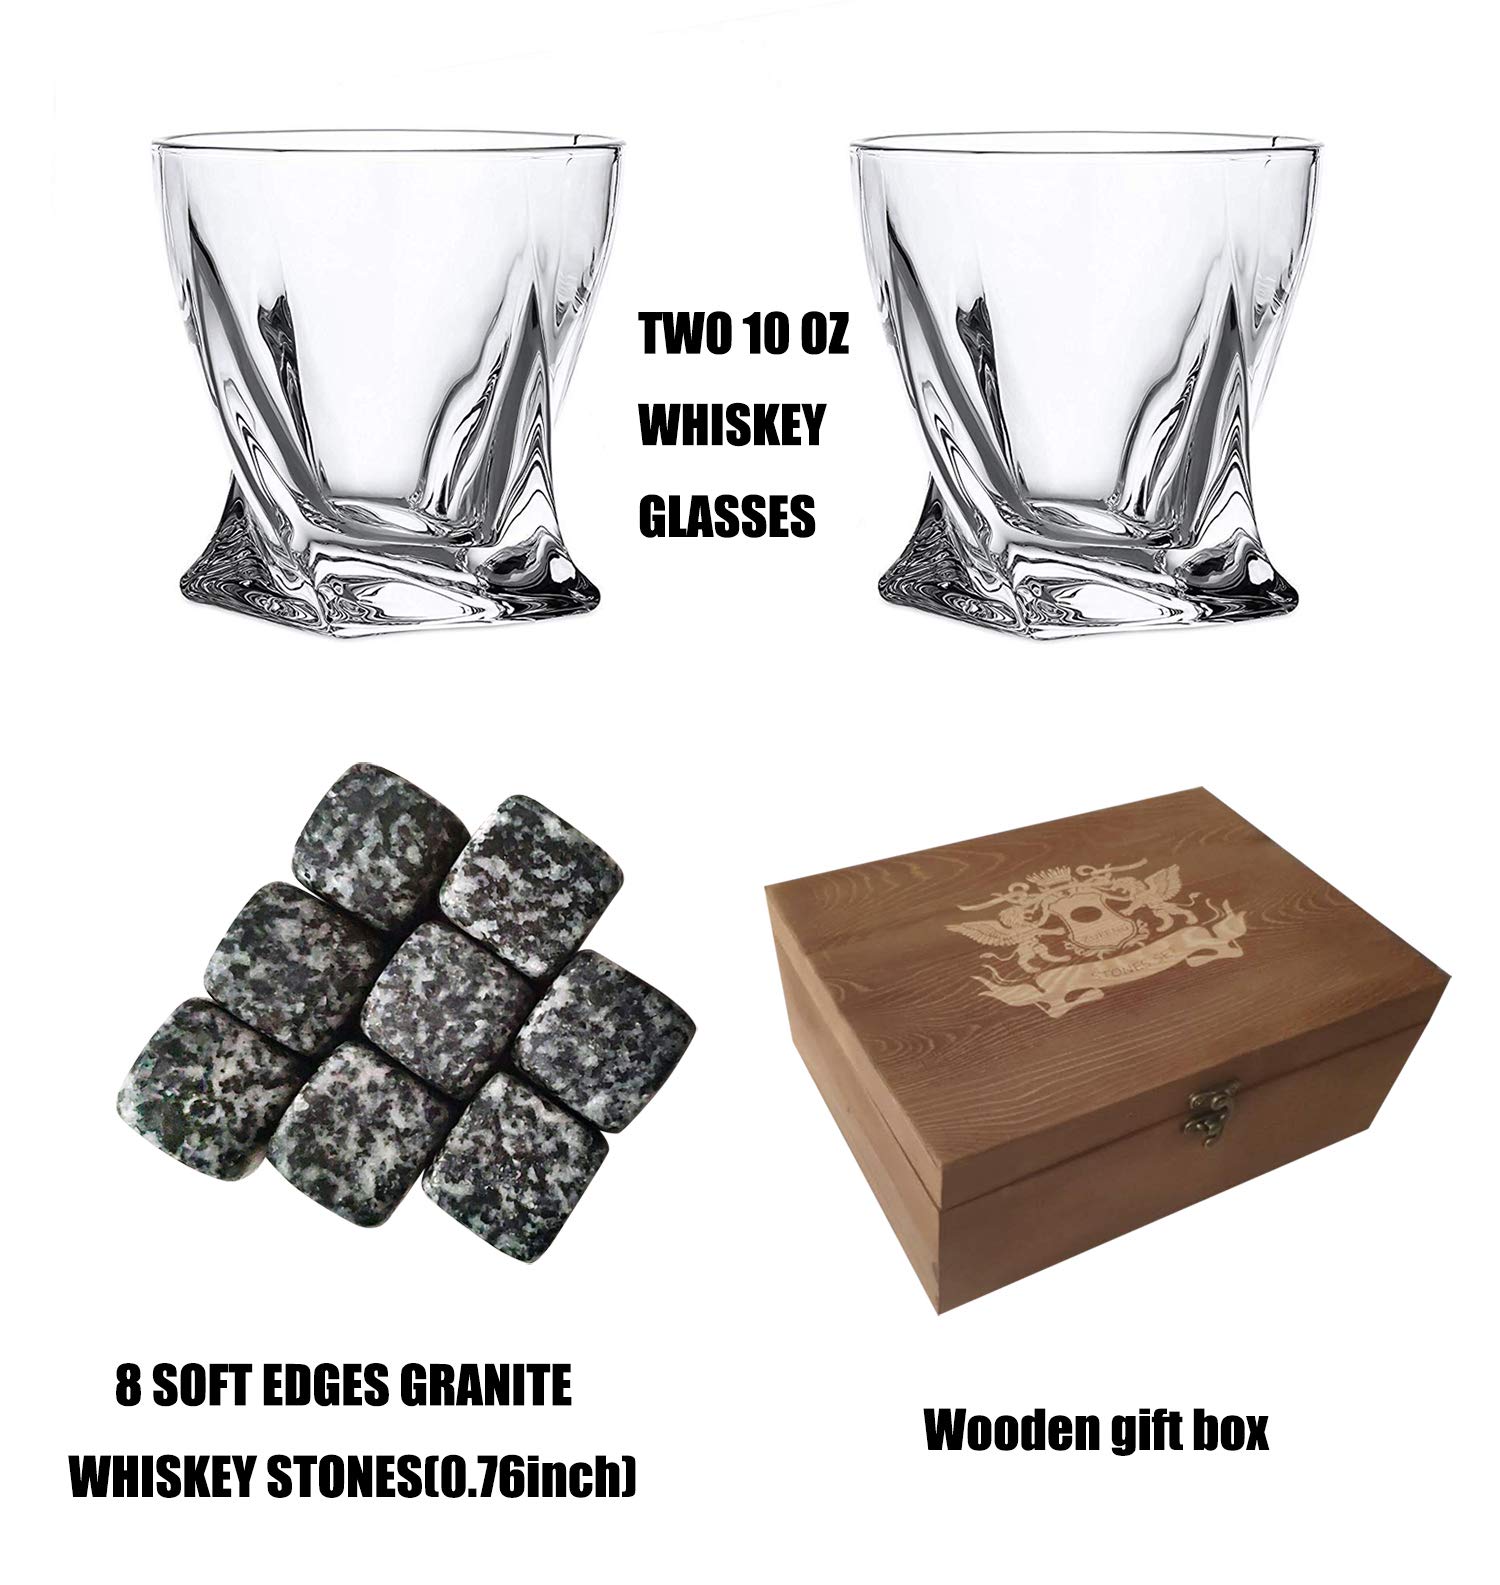 Whiskey Stones and Whiskey Glass Gift Boxed Set - 8 Granite Chilling Whisky Rocks + 2 Large 11 oz Crystal Glasses in Wooden Box - Great Gift for Dad's Birthday or Anytime For Dad/Father/husband bro